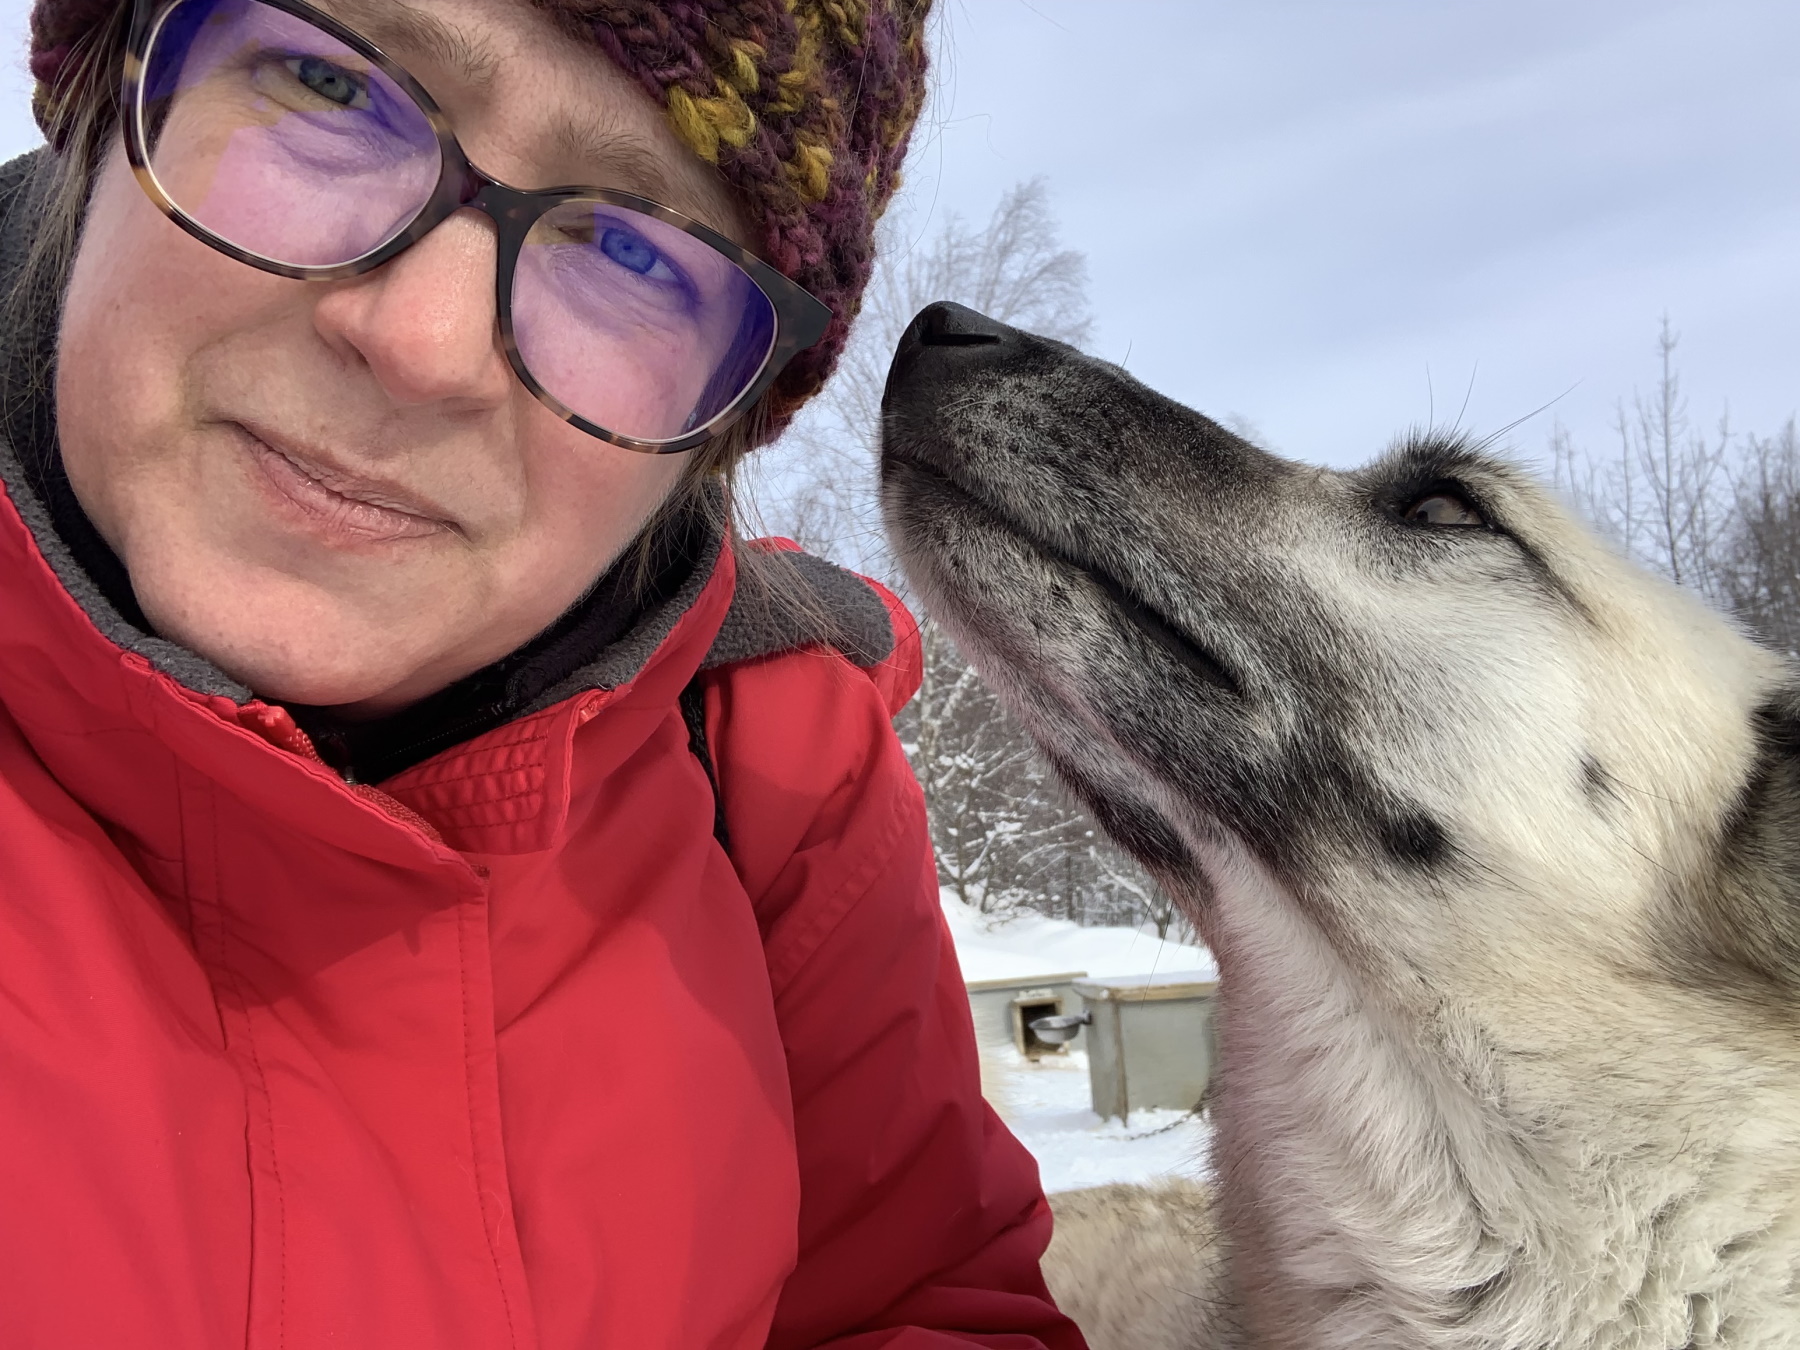 Kate Newmyer gets a kiss on the cheek from a sled dog.